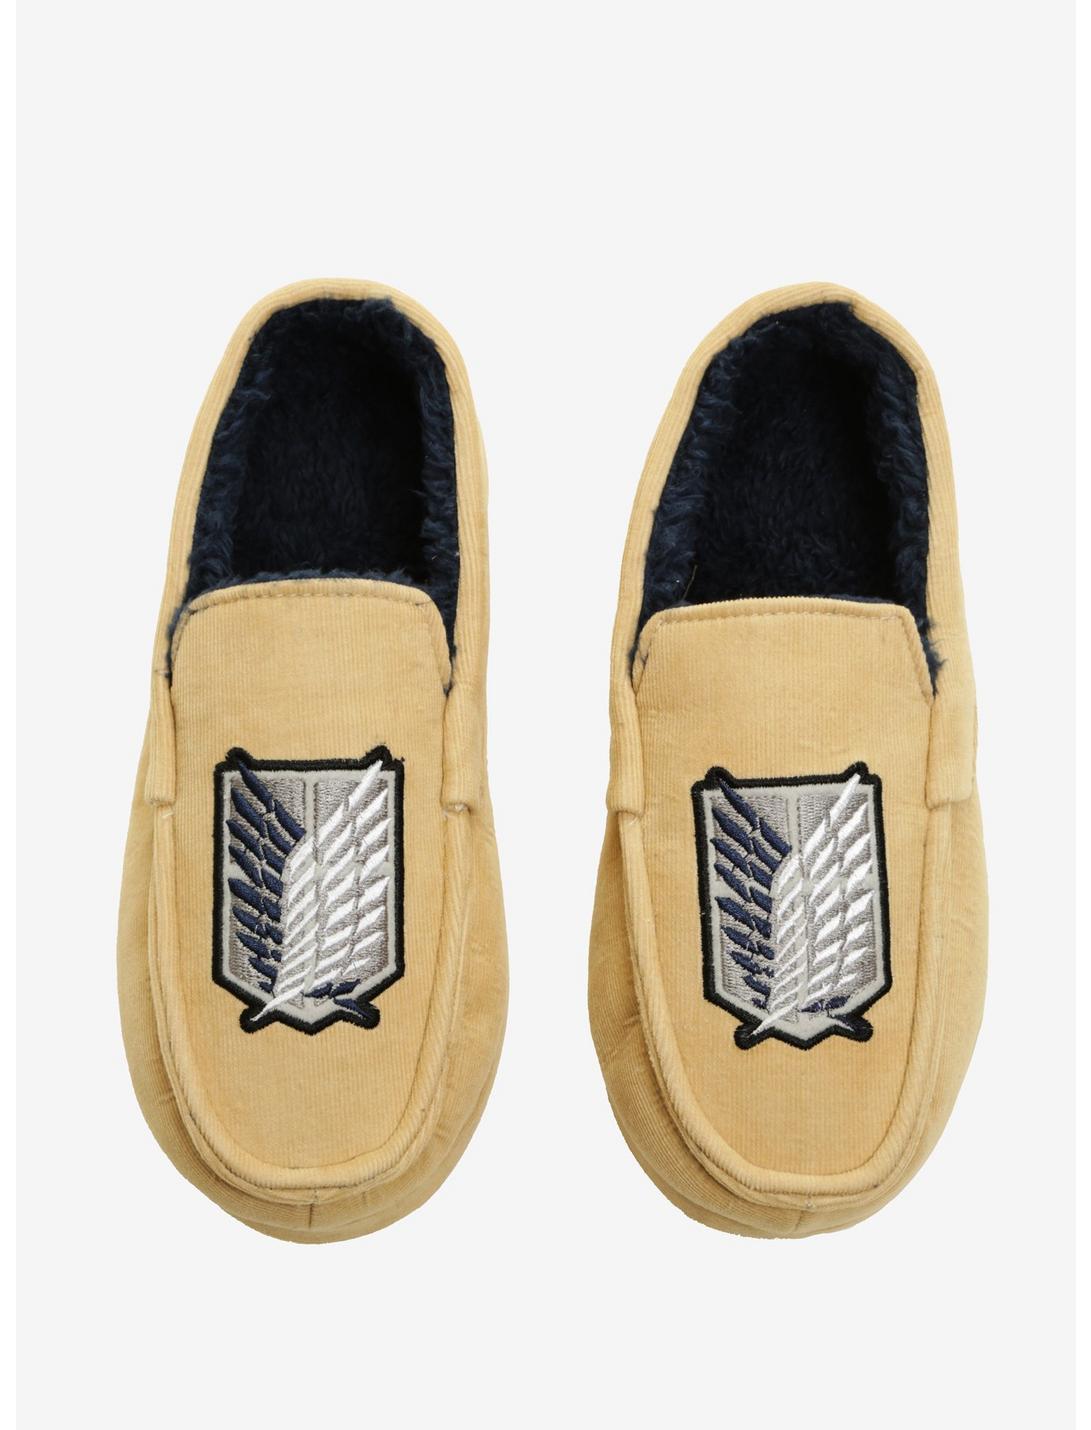 Attack On Titan Corduroy Moccasin Slippers, BROWN, hi-res